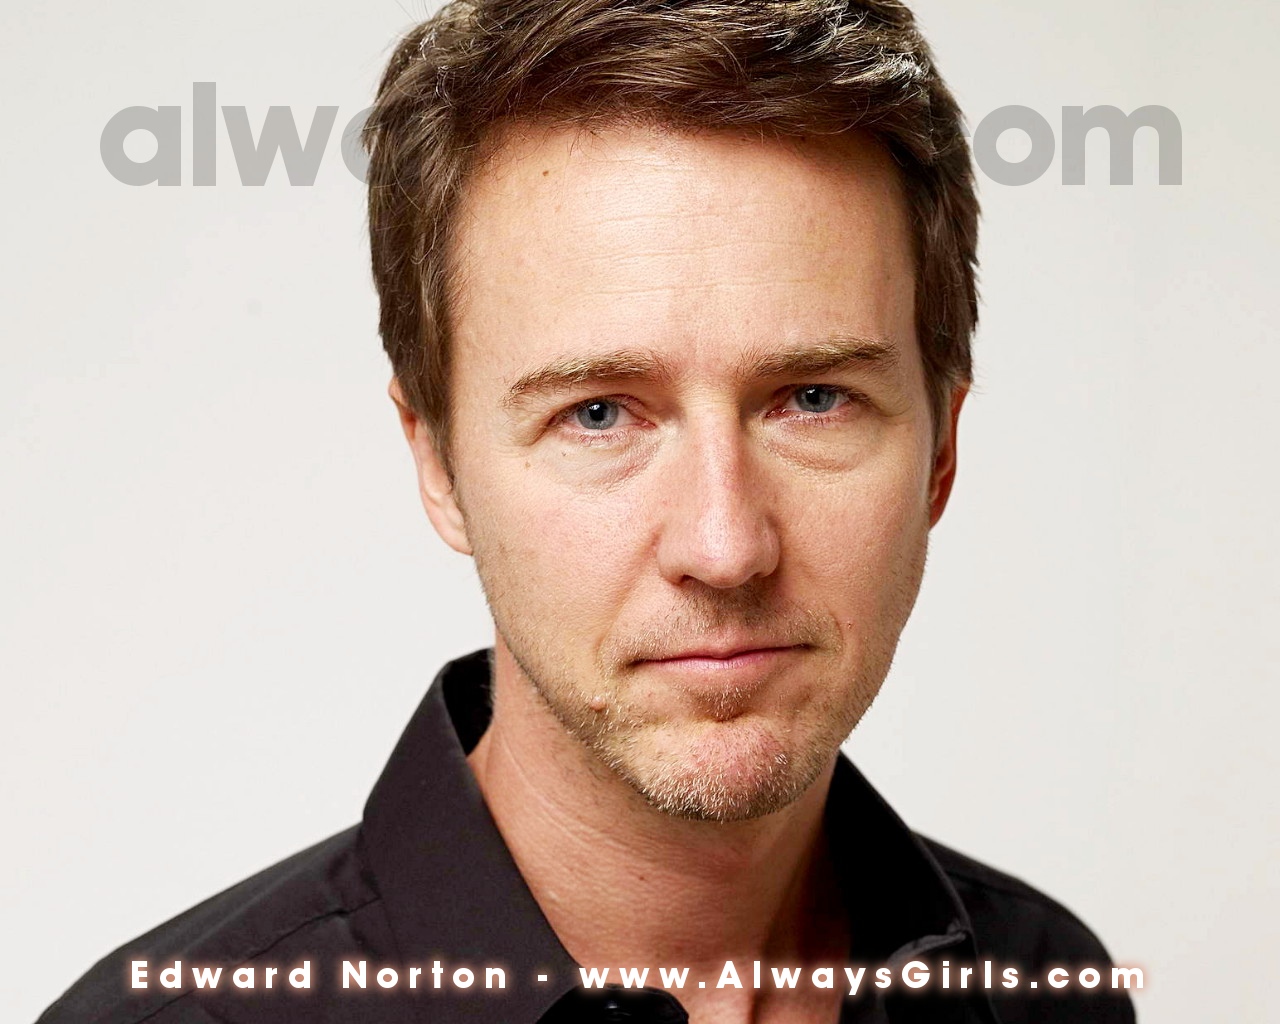 Edward Norton Wallpaper - Right click your mouse and choose "Set As Background" to